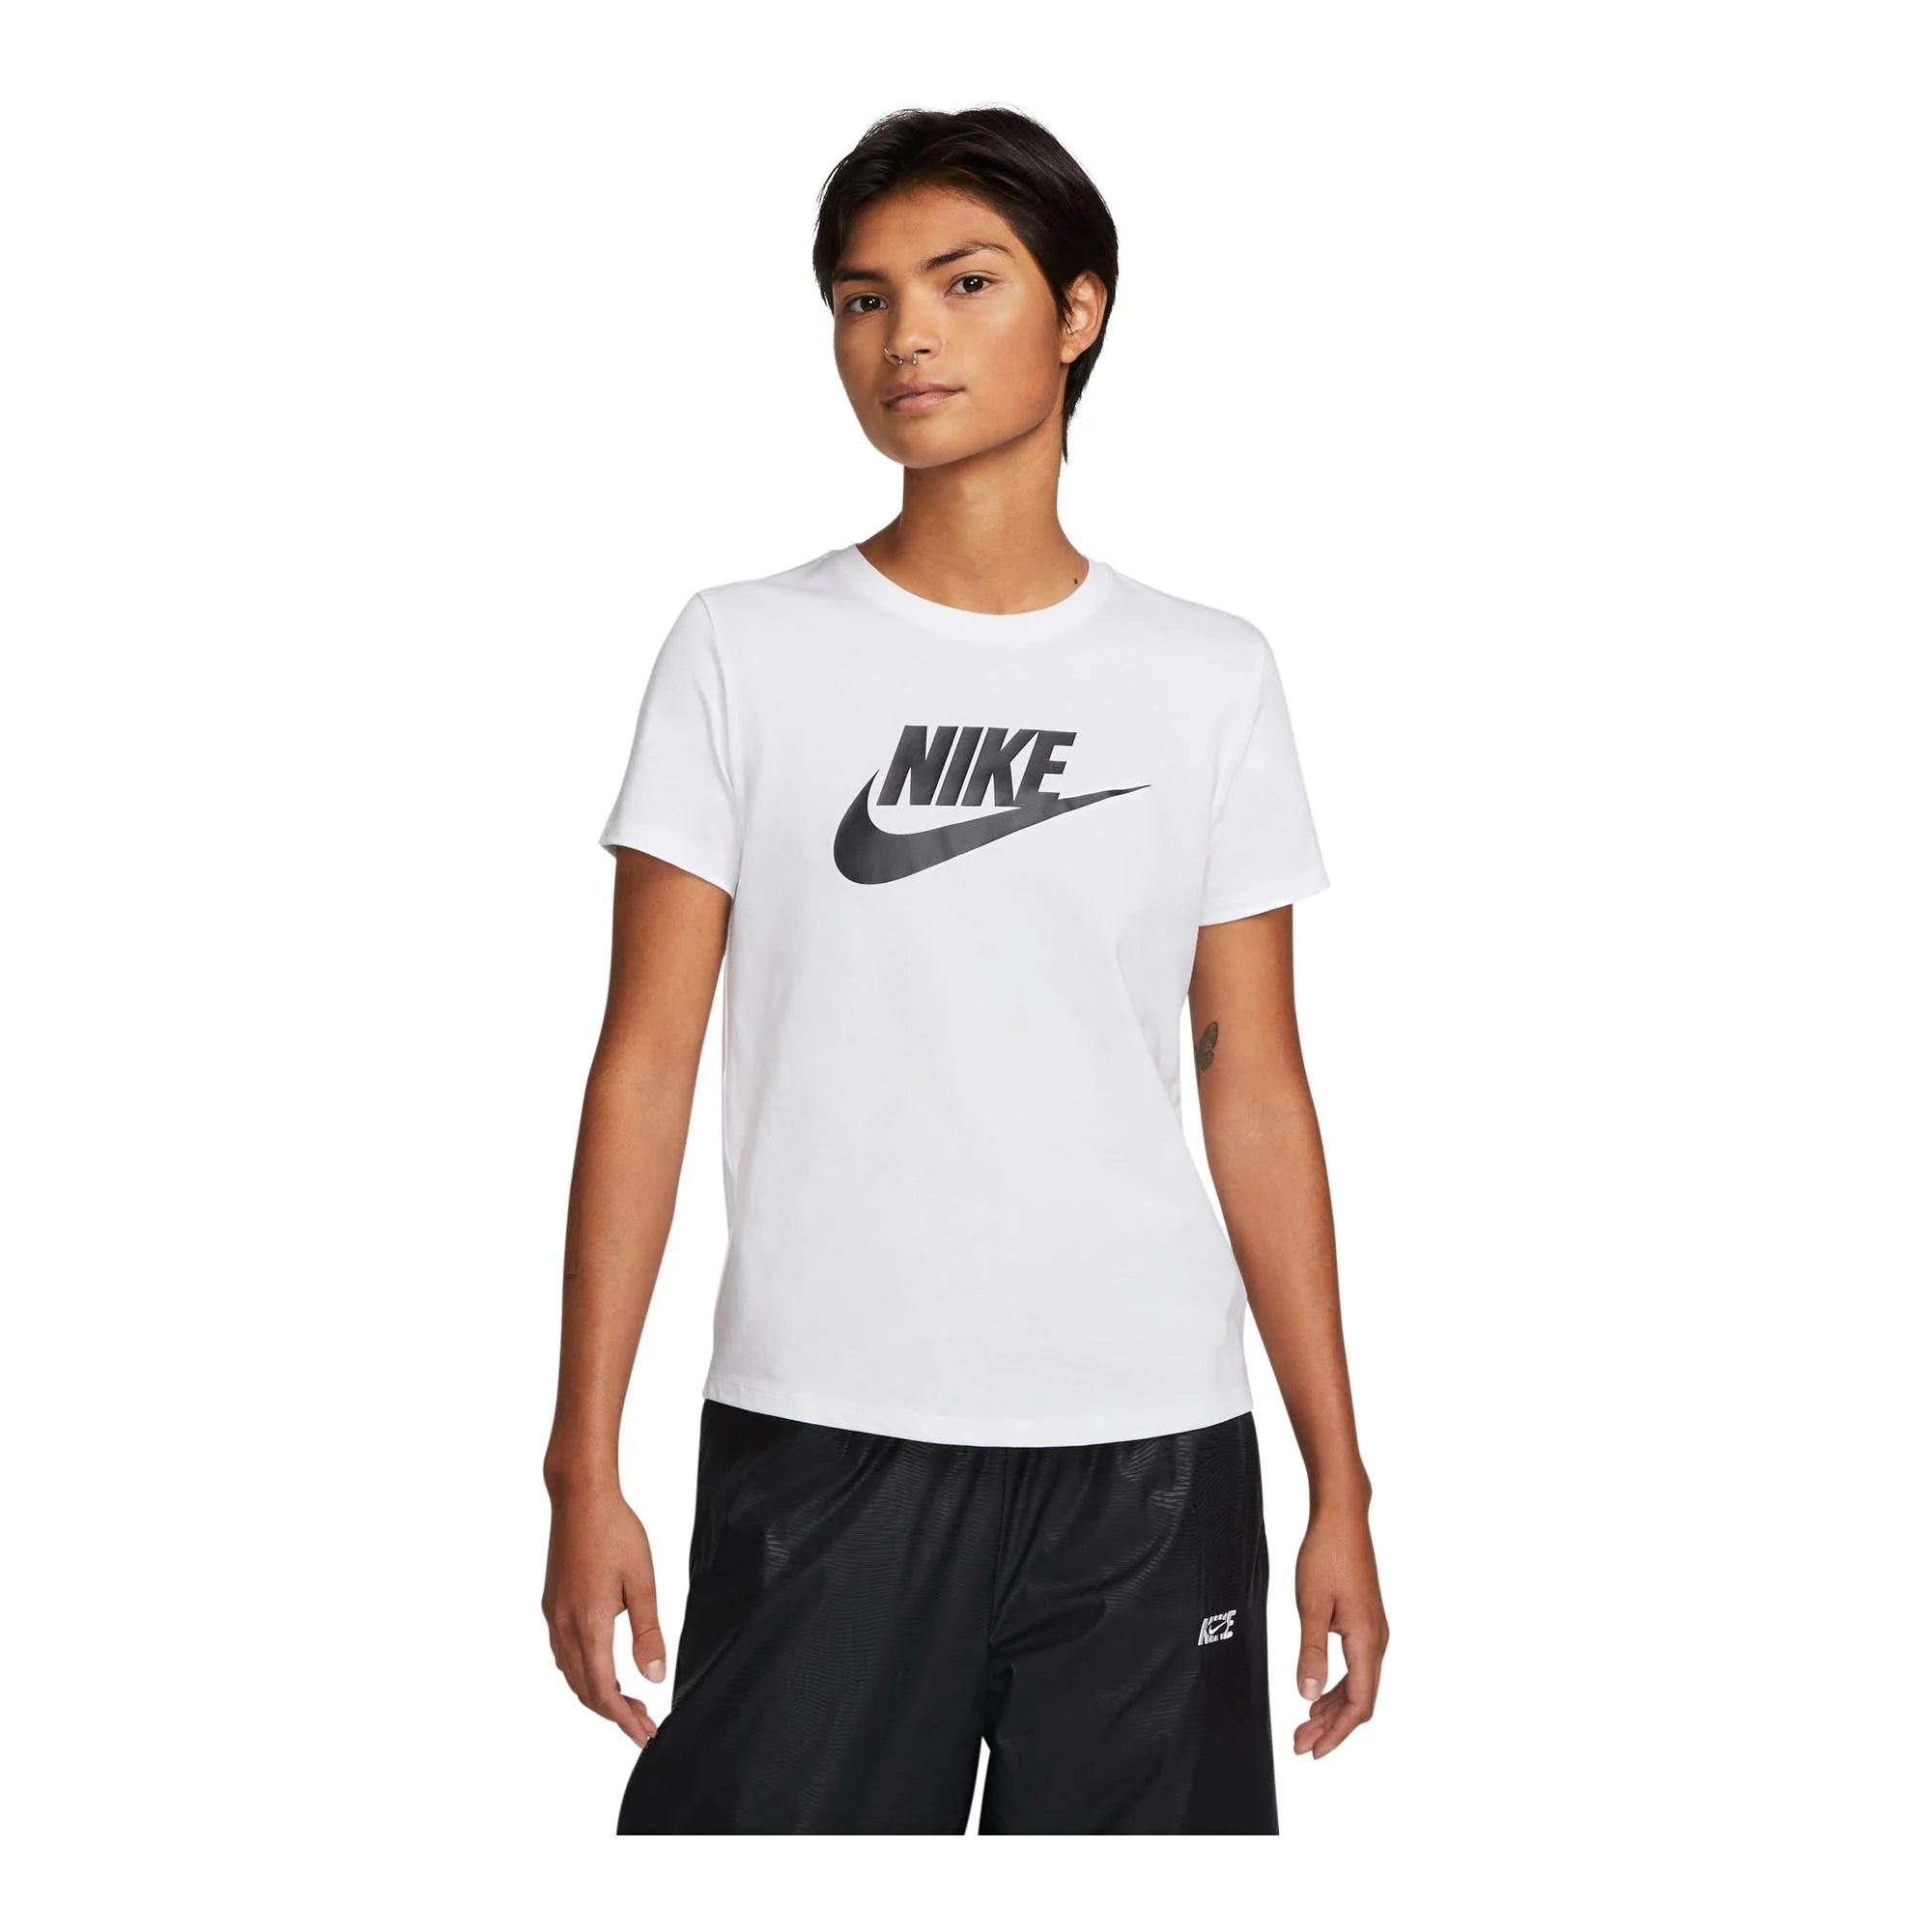 Nike Outfits for Women on a Budget: How to Look Great Without Breaking the Bank